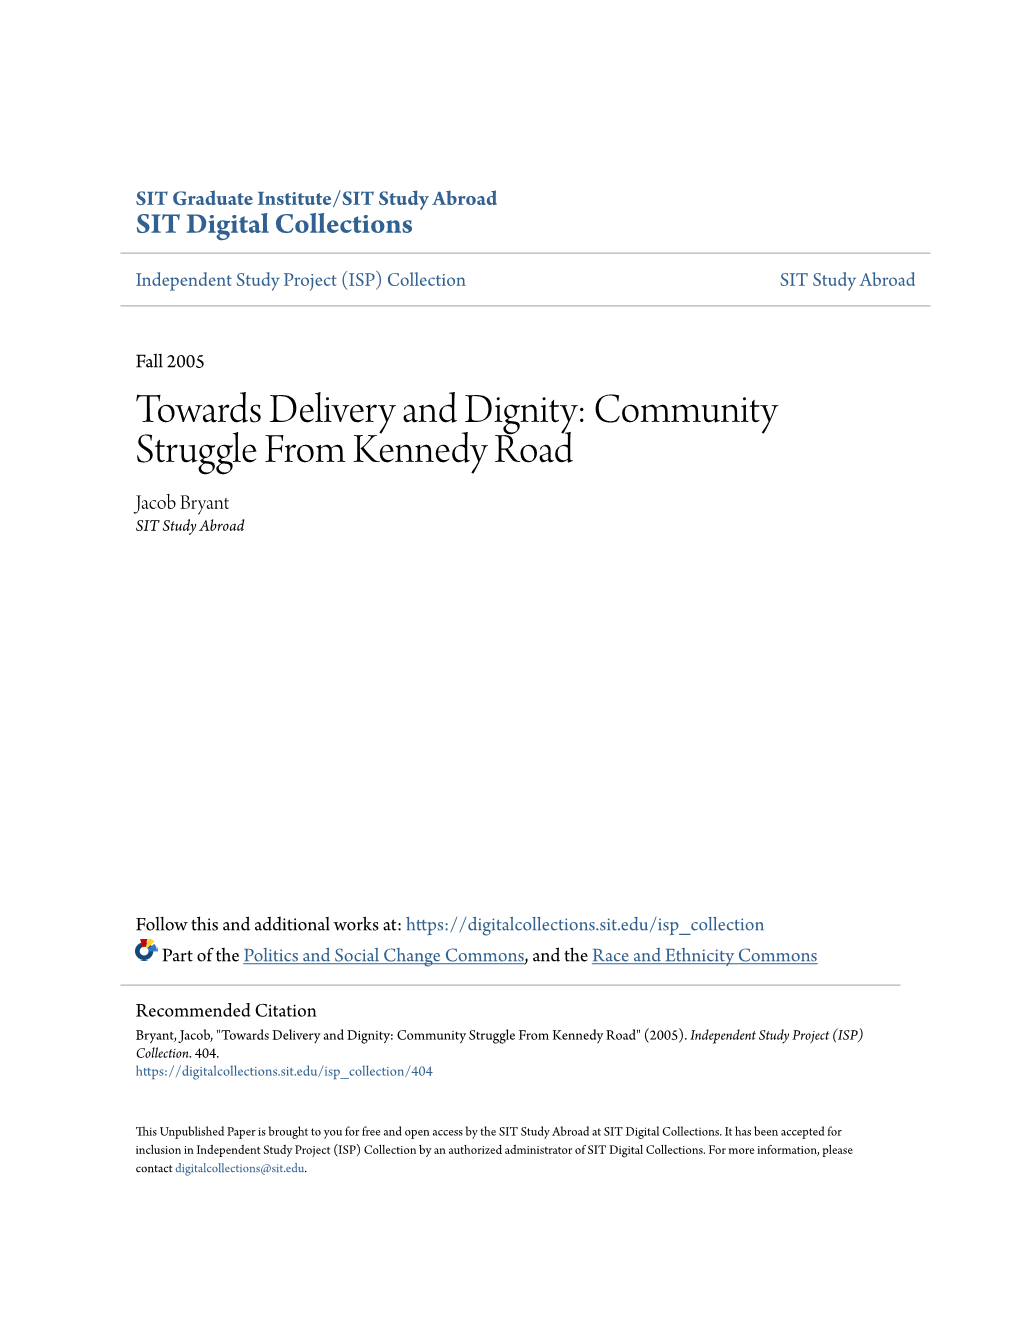 Community Struggle from Kennedy Road Jacob Bryant SIT Study Abroad